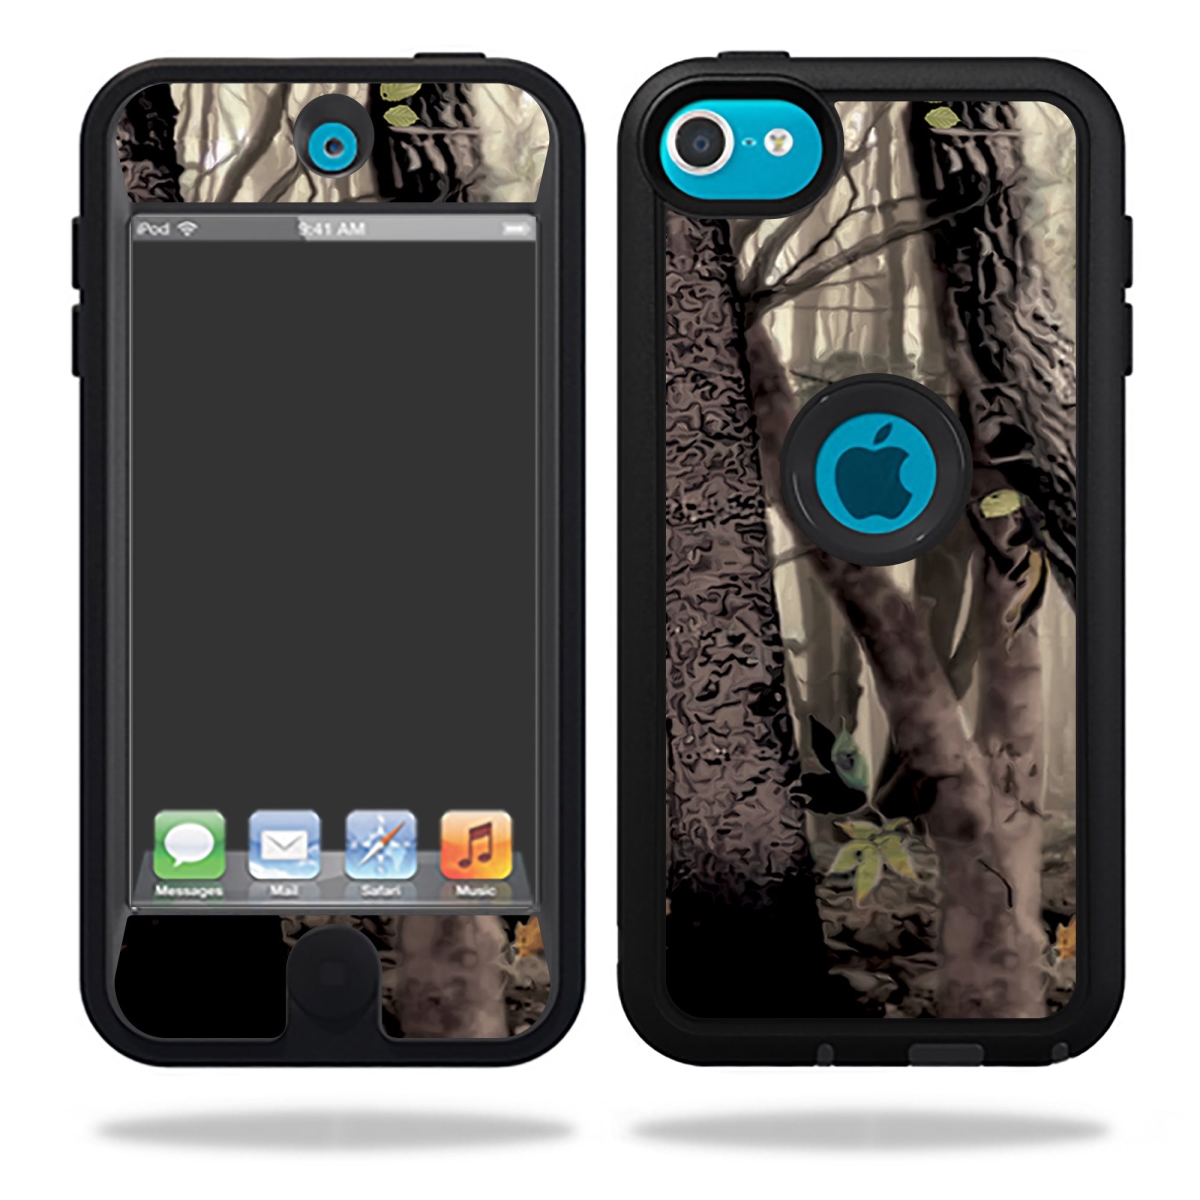 MightySkins OTDIPT5G-Tree Camo Skin Compatible with OtterBox Defender Apple iPod Touch 5G 5th Generation Case Tree Camo